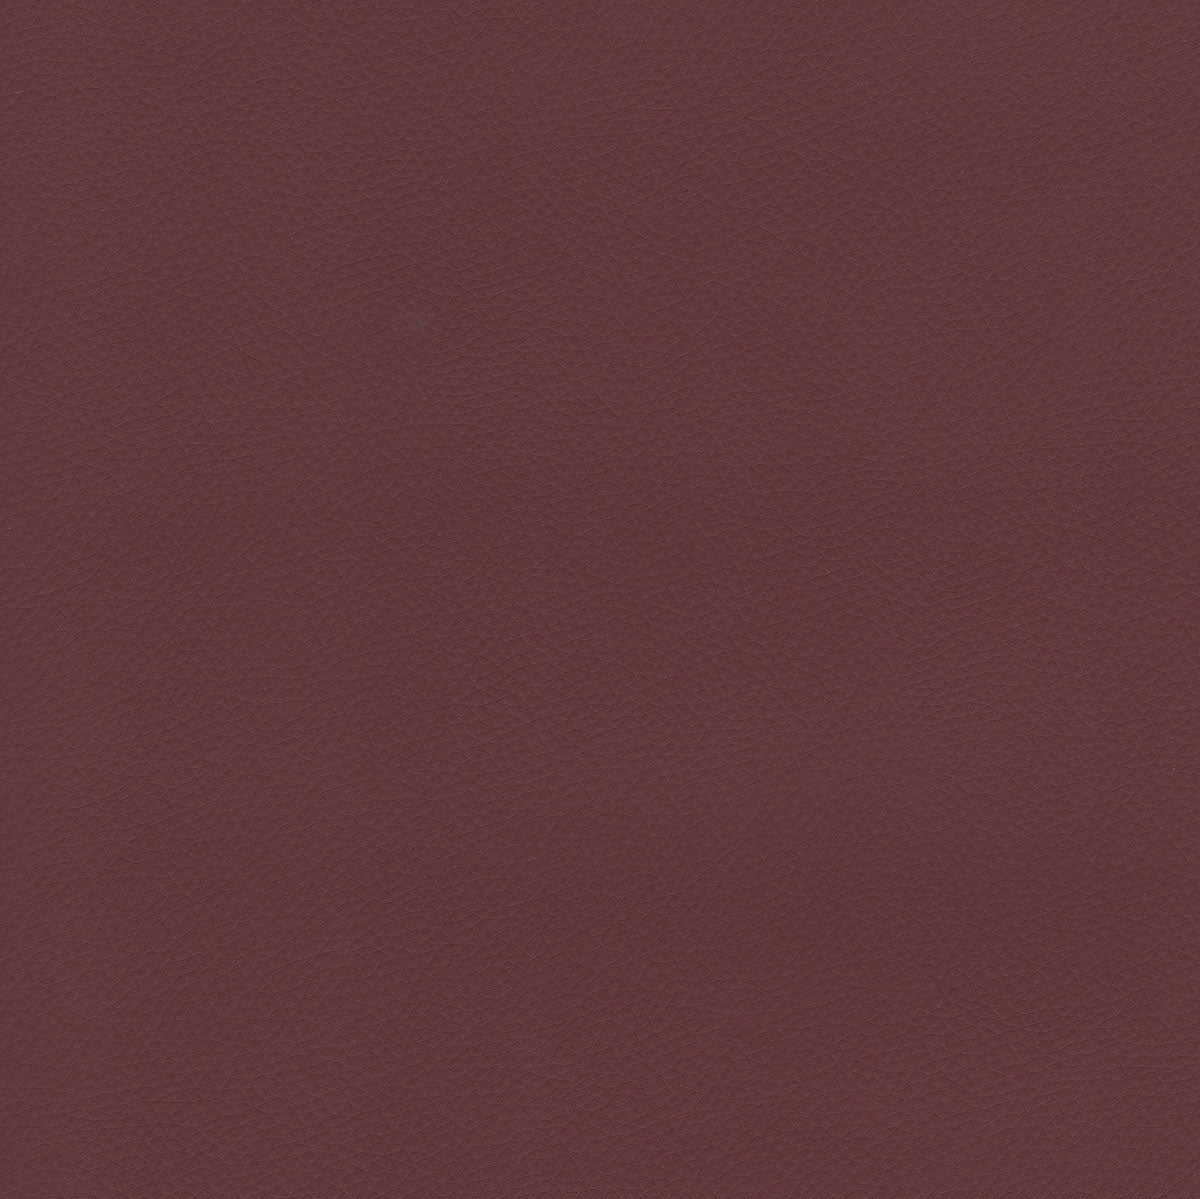 Premier-312 Merlot Leatherette by Sileather